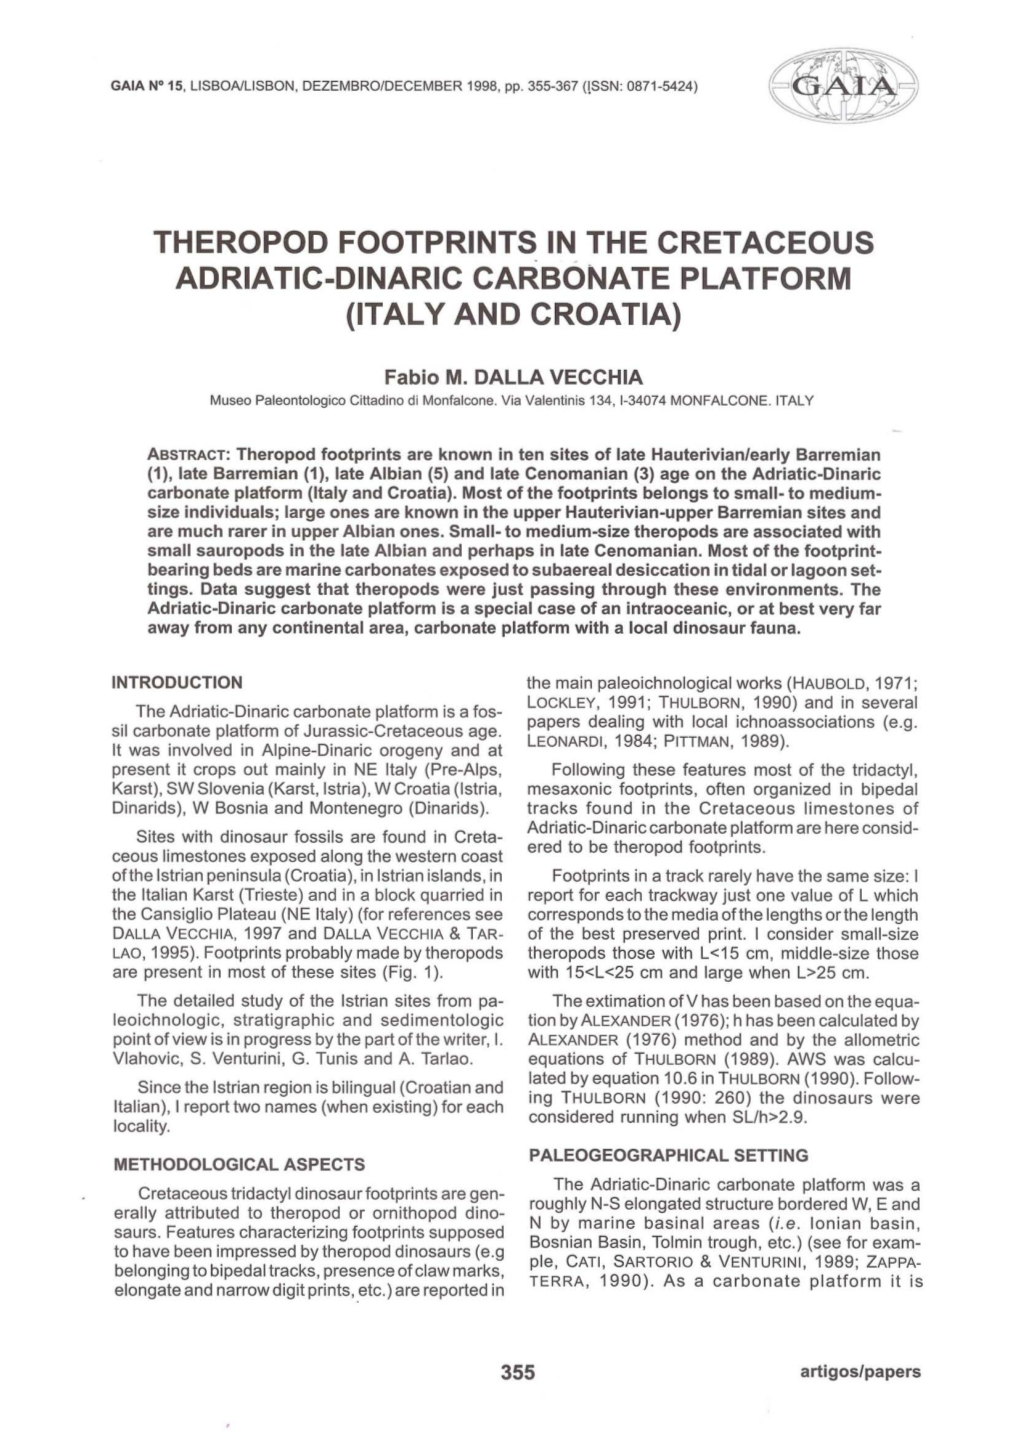 Theropod Footprints in the Cretaceous Adriatic-Dinaric Carbonate Platform (Italy and Croatia)